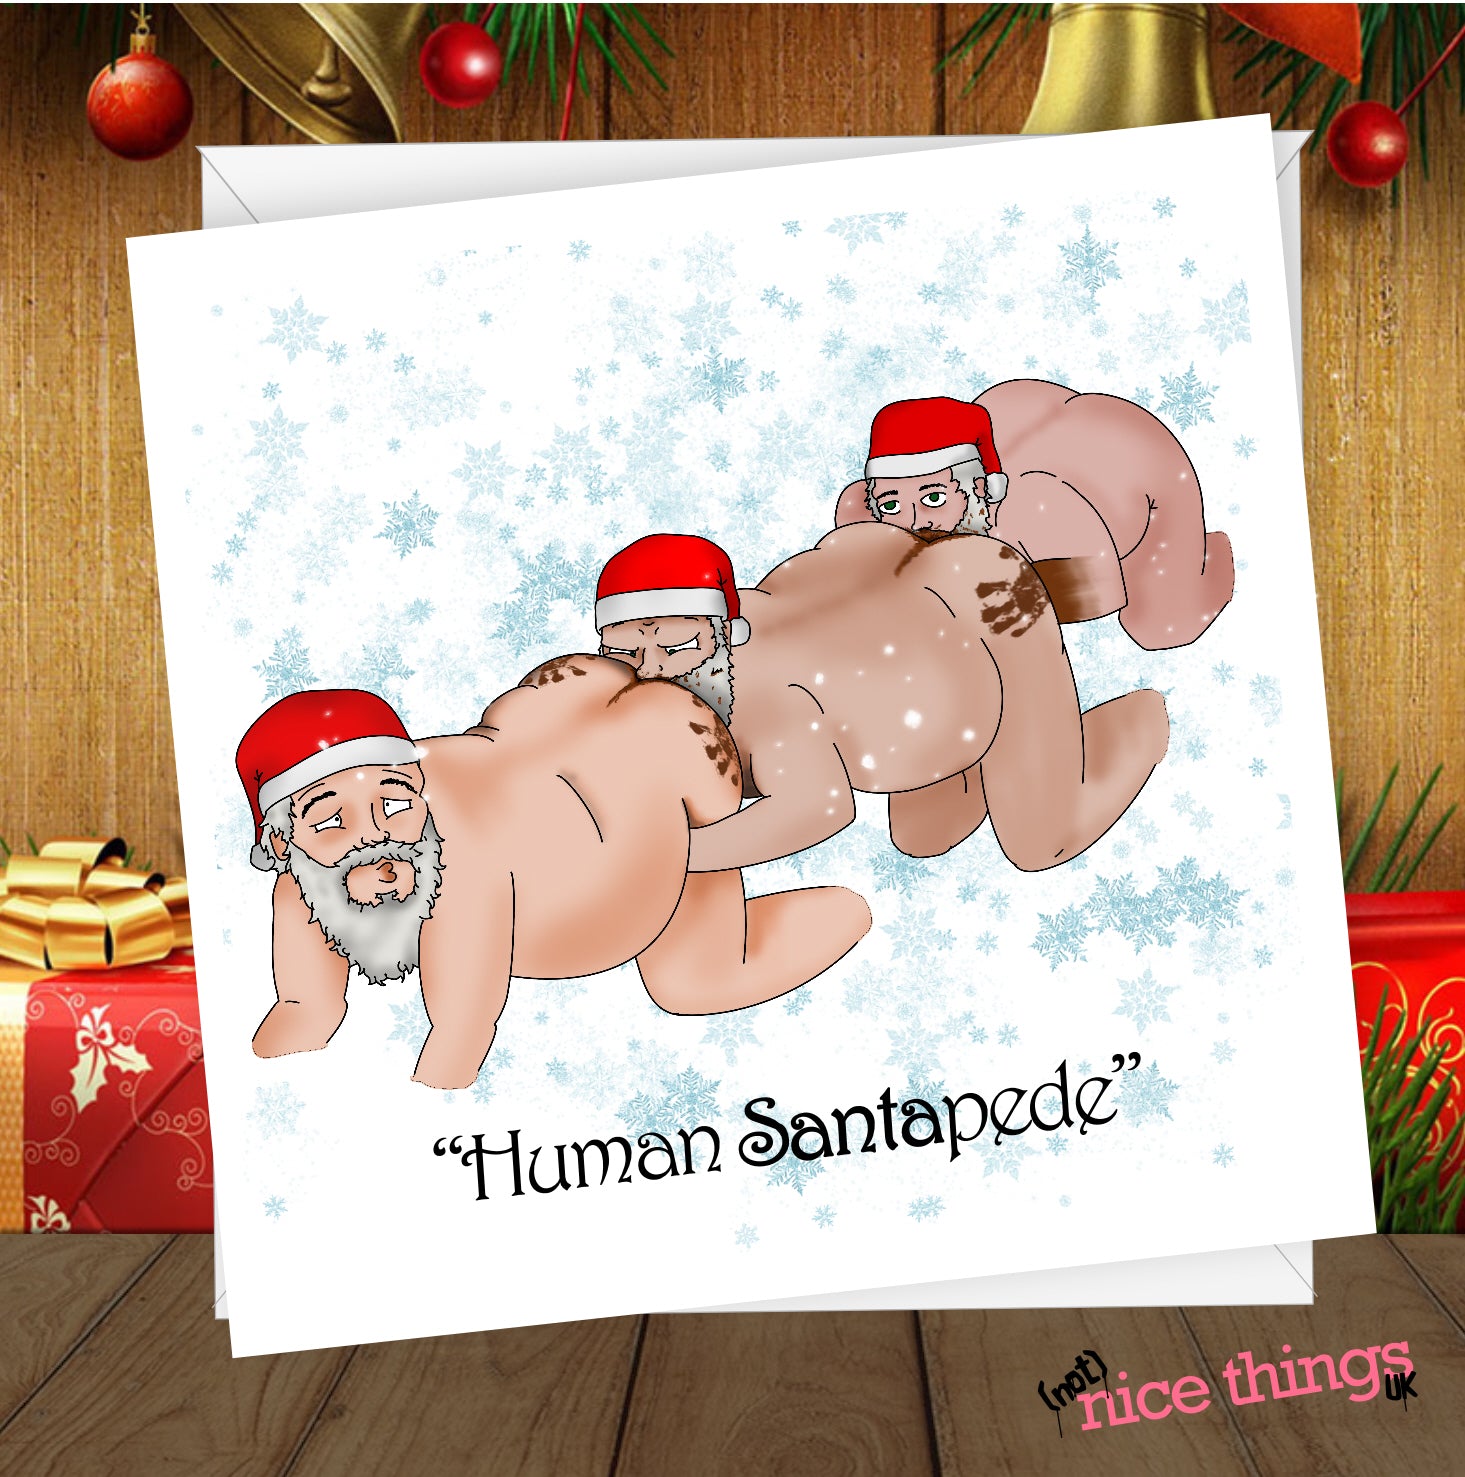 Not Nice Human Santapede- Adult, Rude, Funny Christmas Card Rude, Funny Christmas Card  | Dirty Card | Cards for Friends | Fun gifts for him | Fun gifts for her | Joke cards